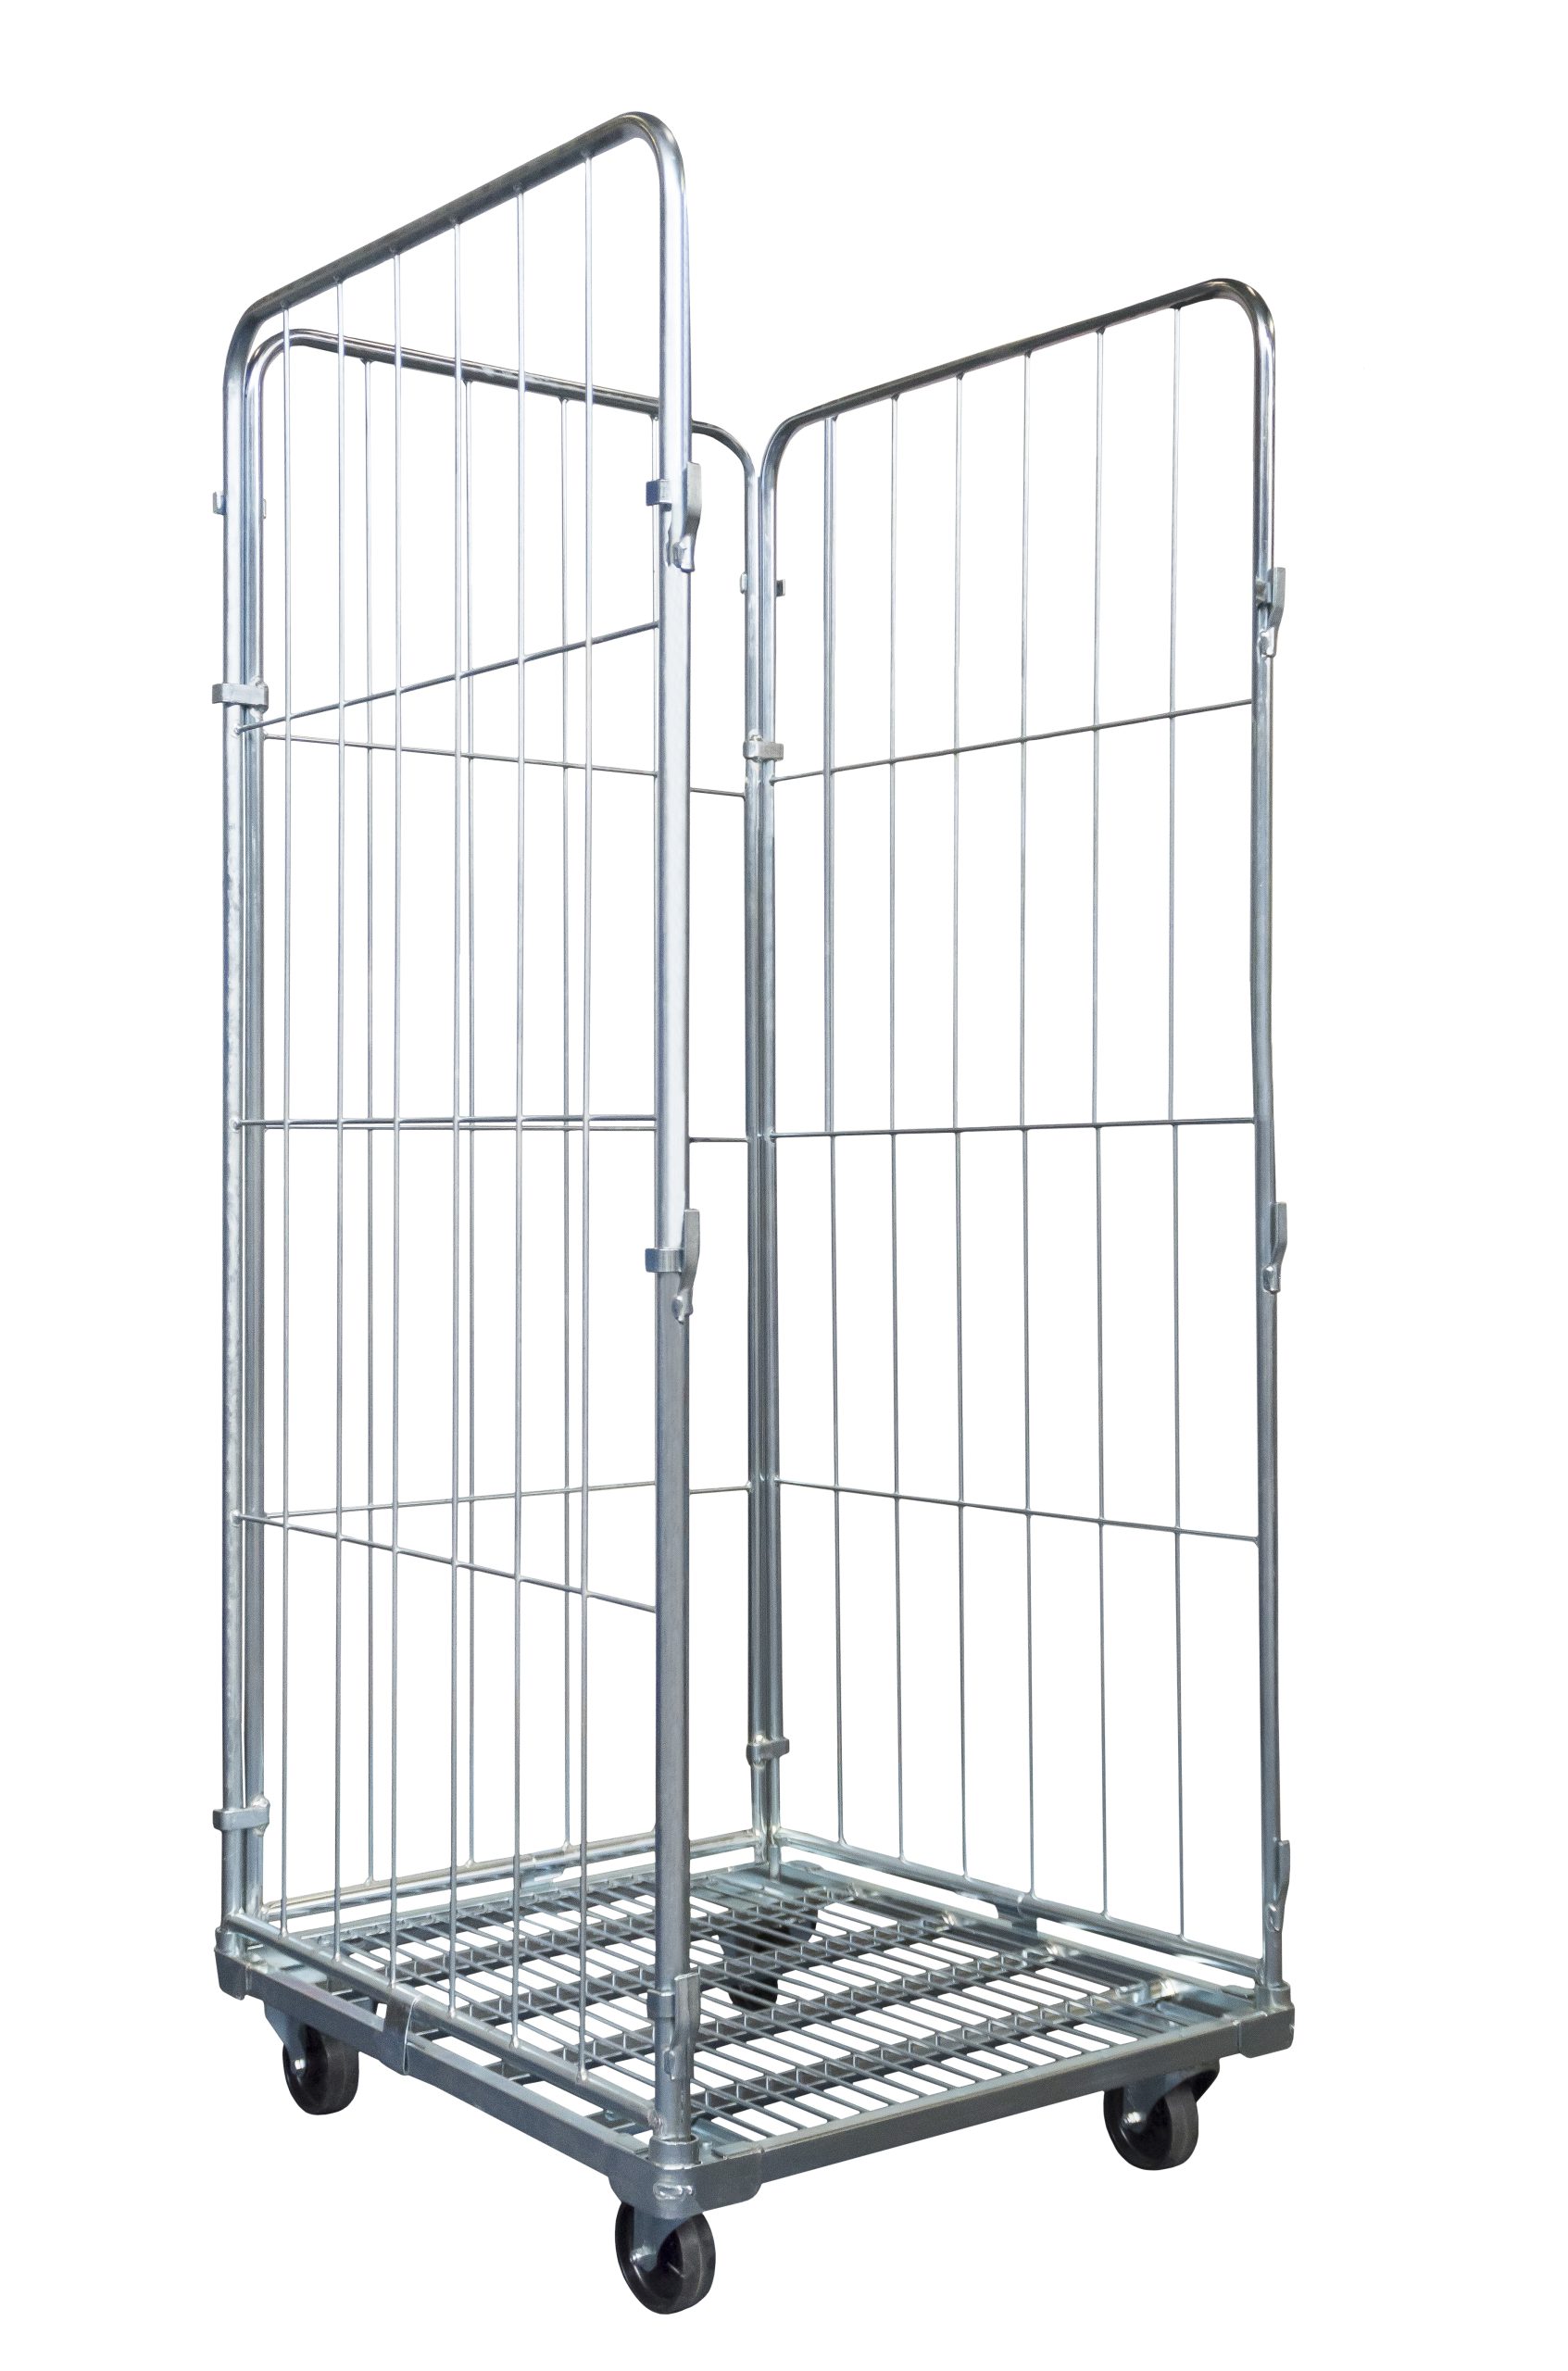 Laundry Roll Cage Container 800x720x1800 Hinged Front Rotomrent Gate, | rent mm kg Load 400 Capacity for